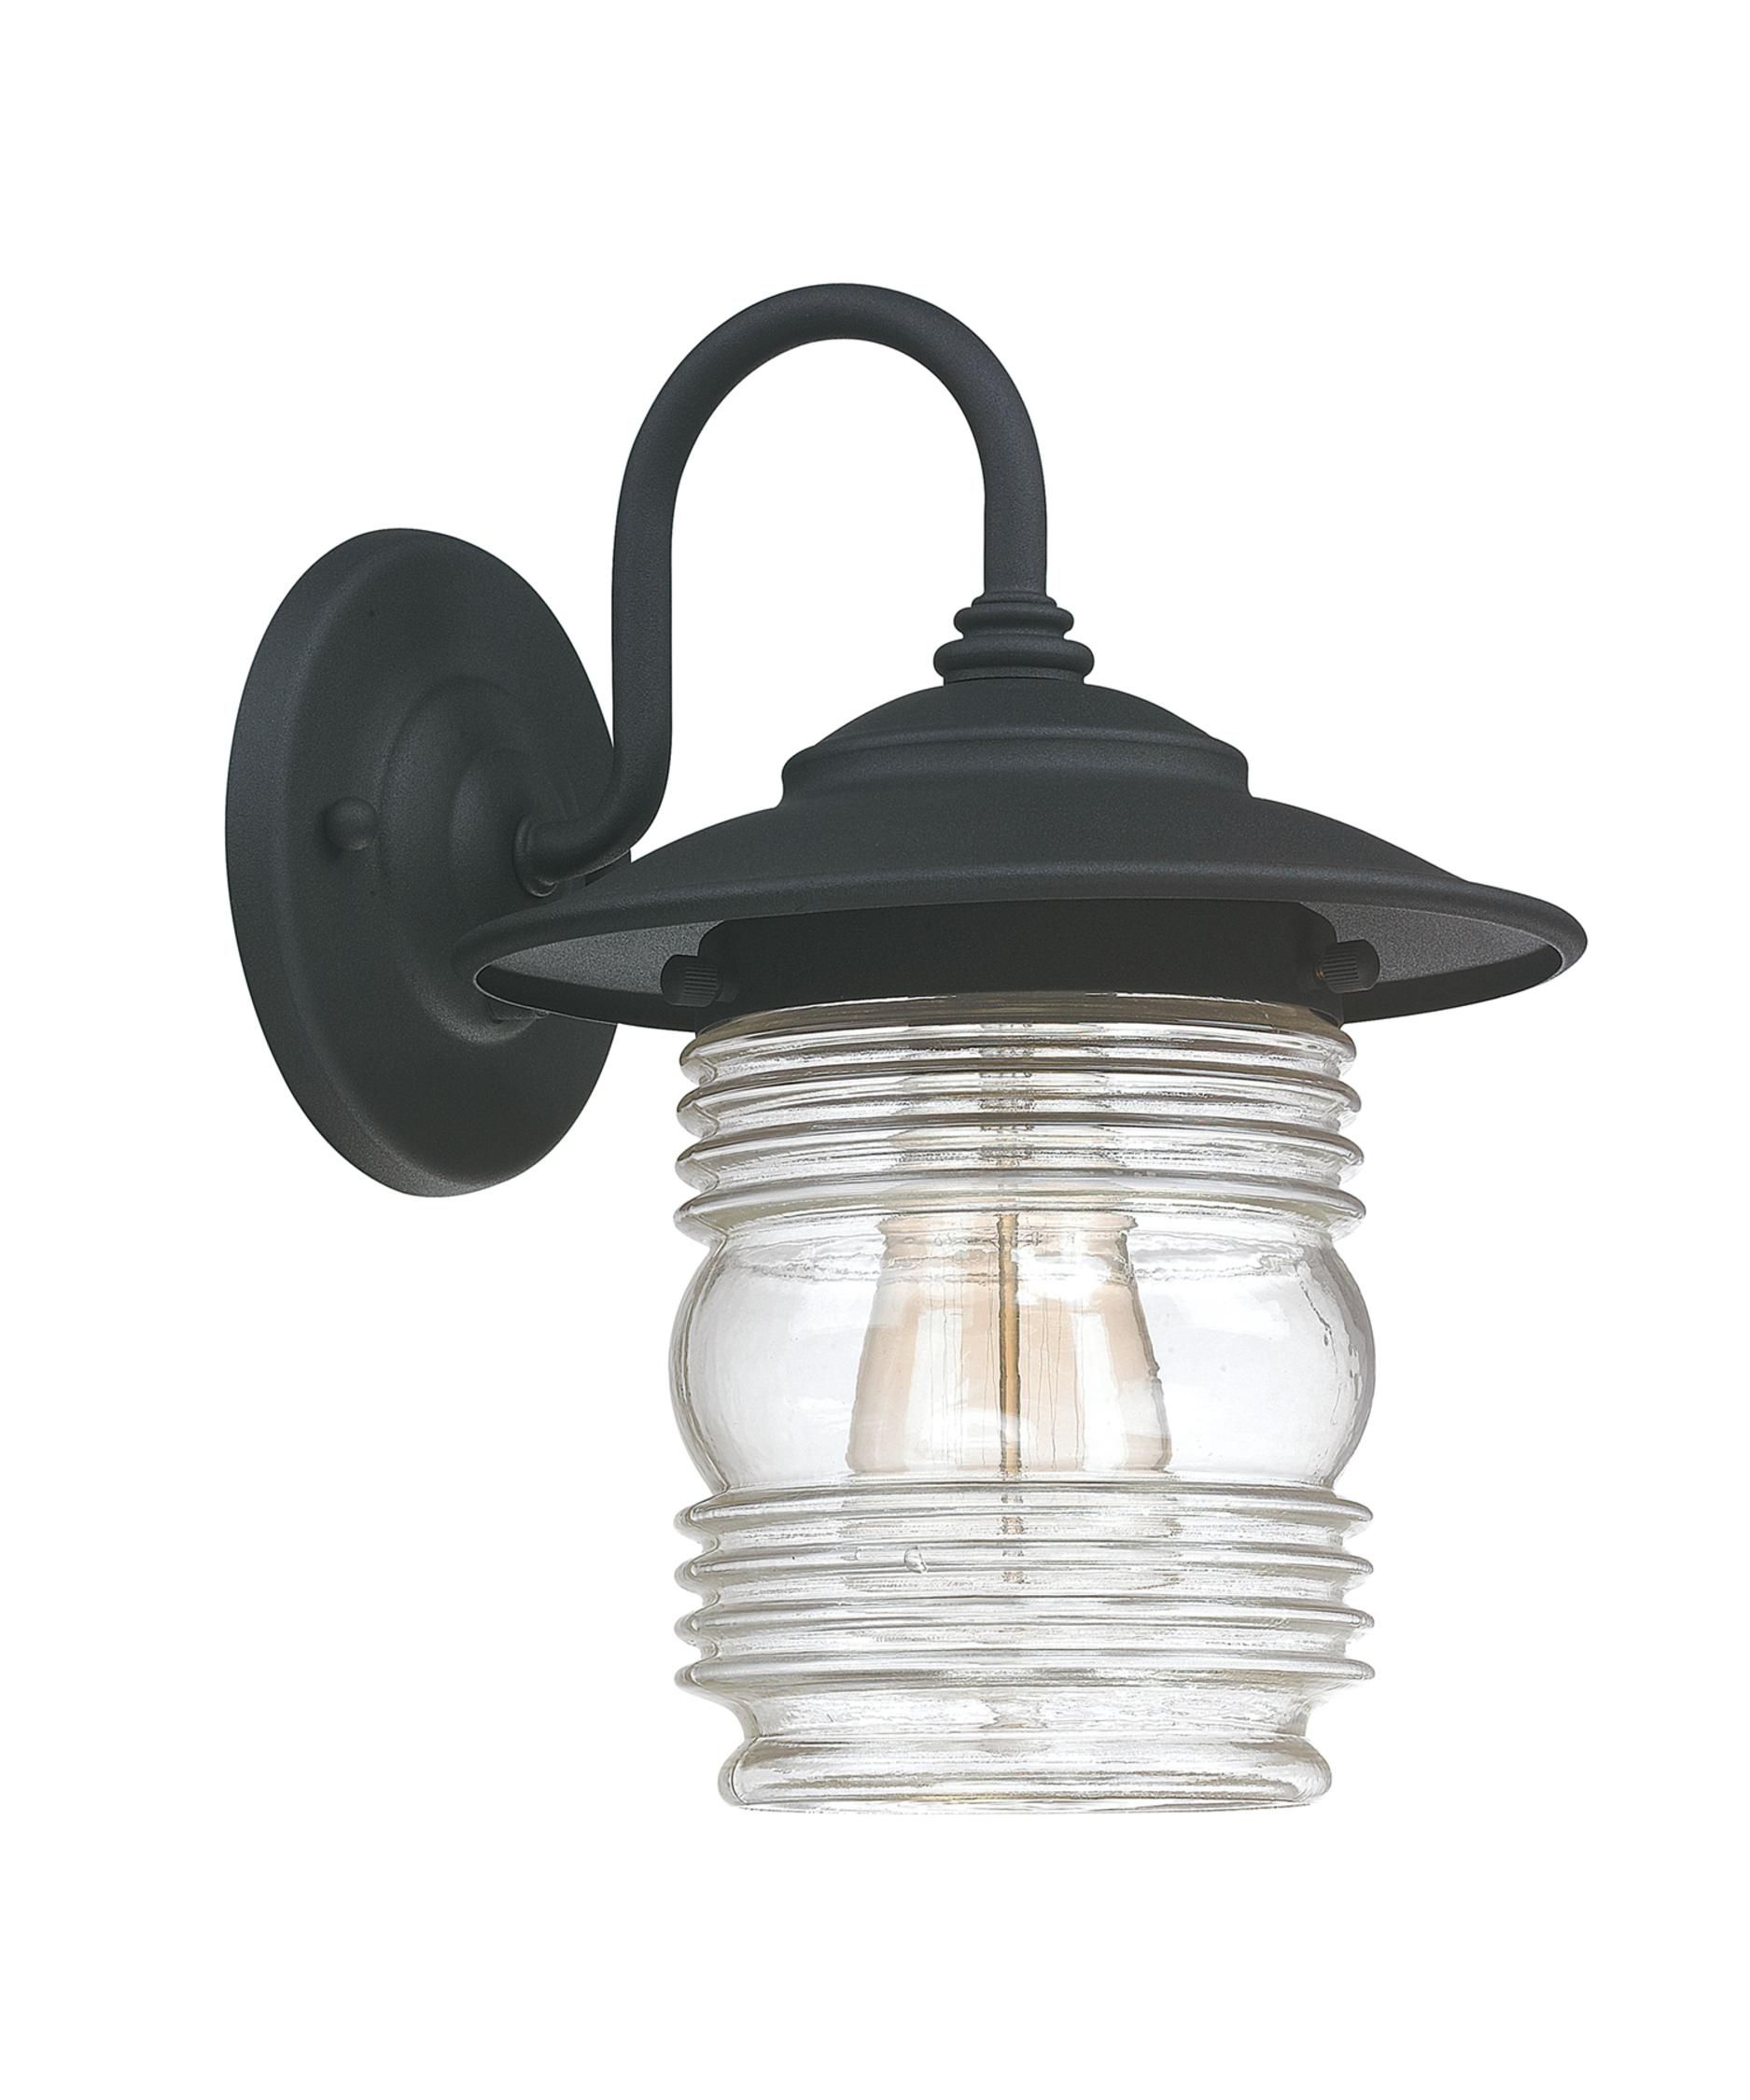 Capital Lighting 9671 Creekside 8 Inch Wide 1 Light Outdoor Wall In Retro Outdoor Wall Lighting (View 12 of 15)